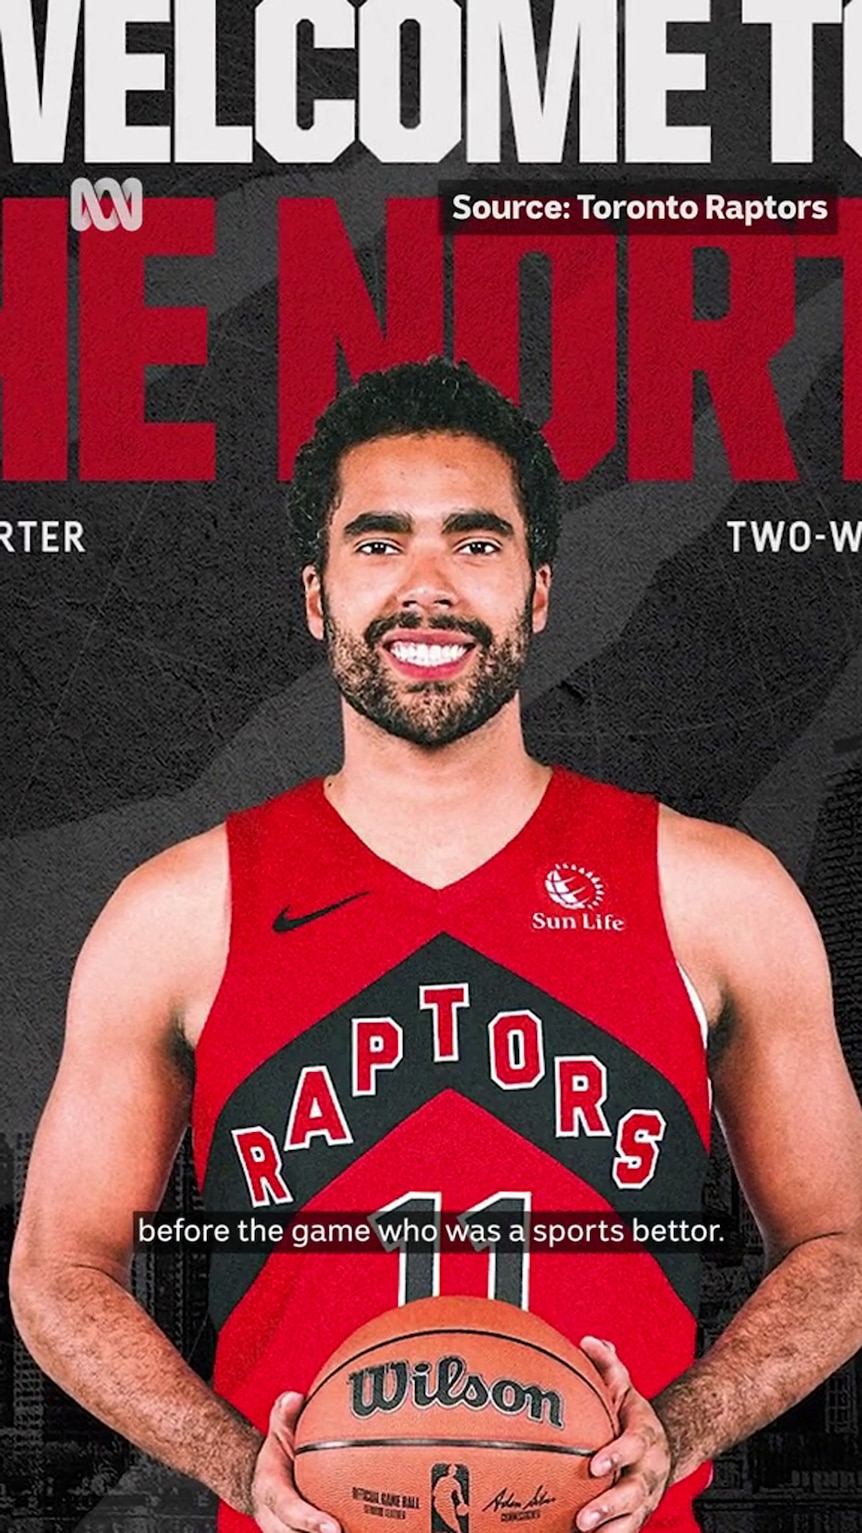 A man in a red and black Raptors singlet numbered 11 smiles while holding a Wilson basketball